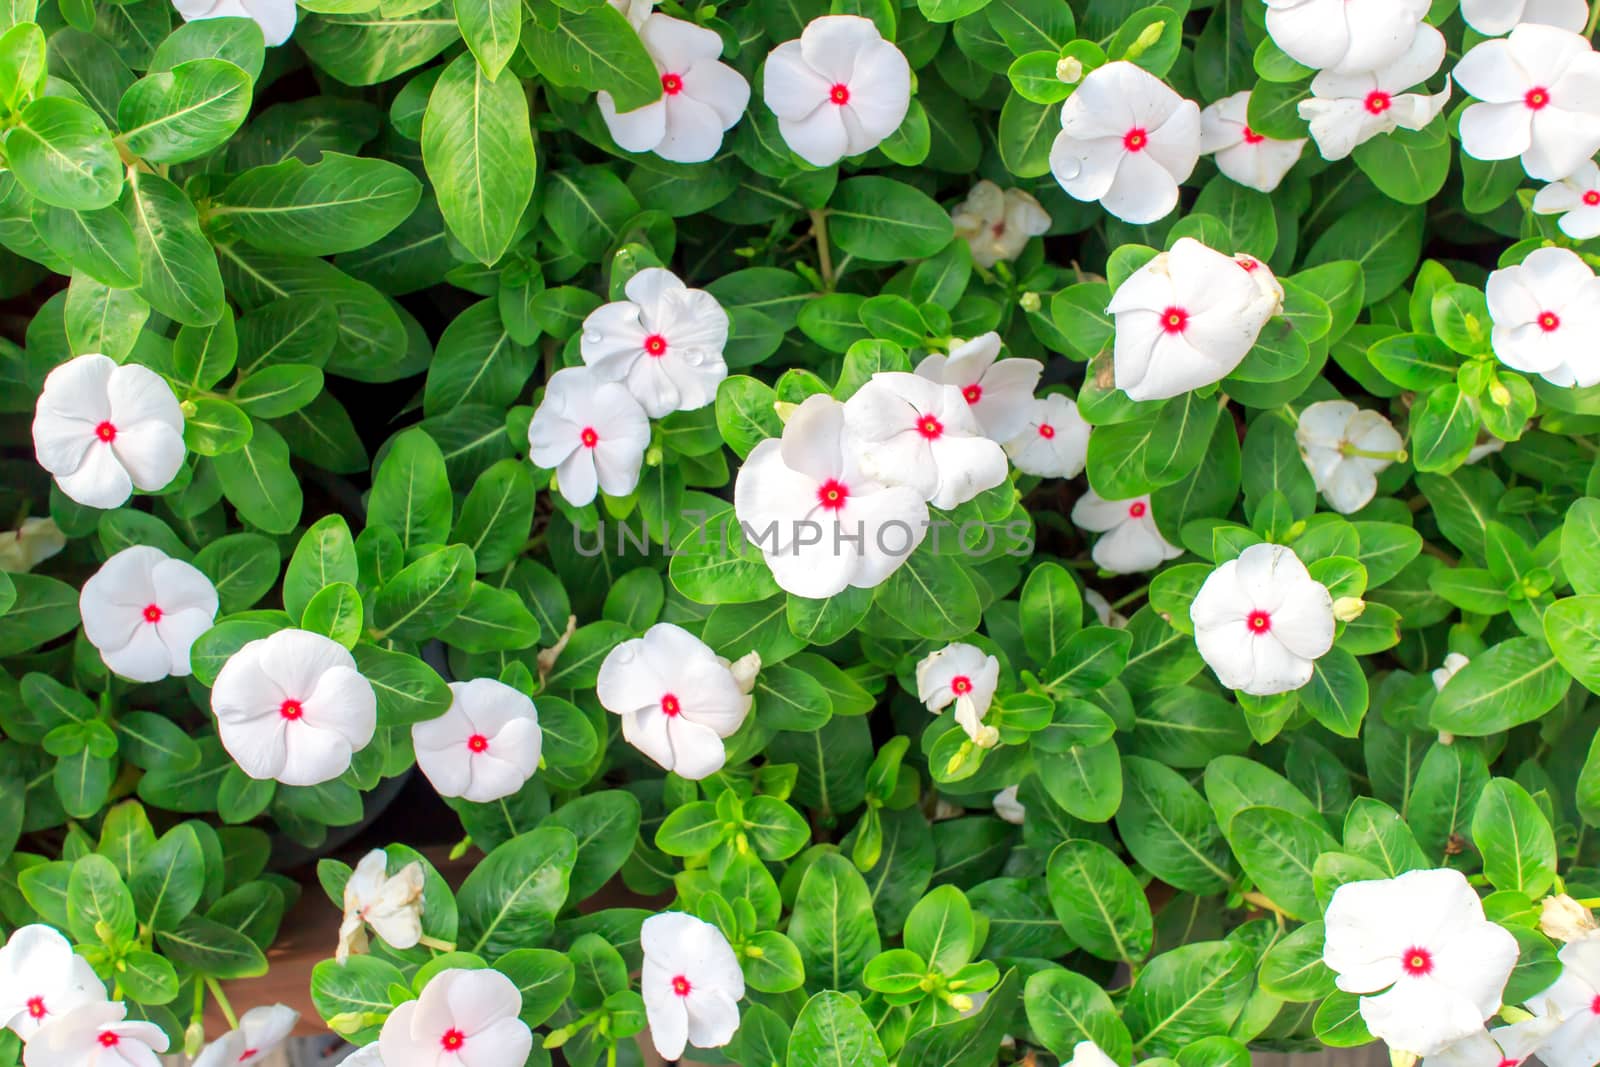 White Periwinkle on a leaves green background.